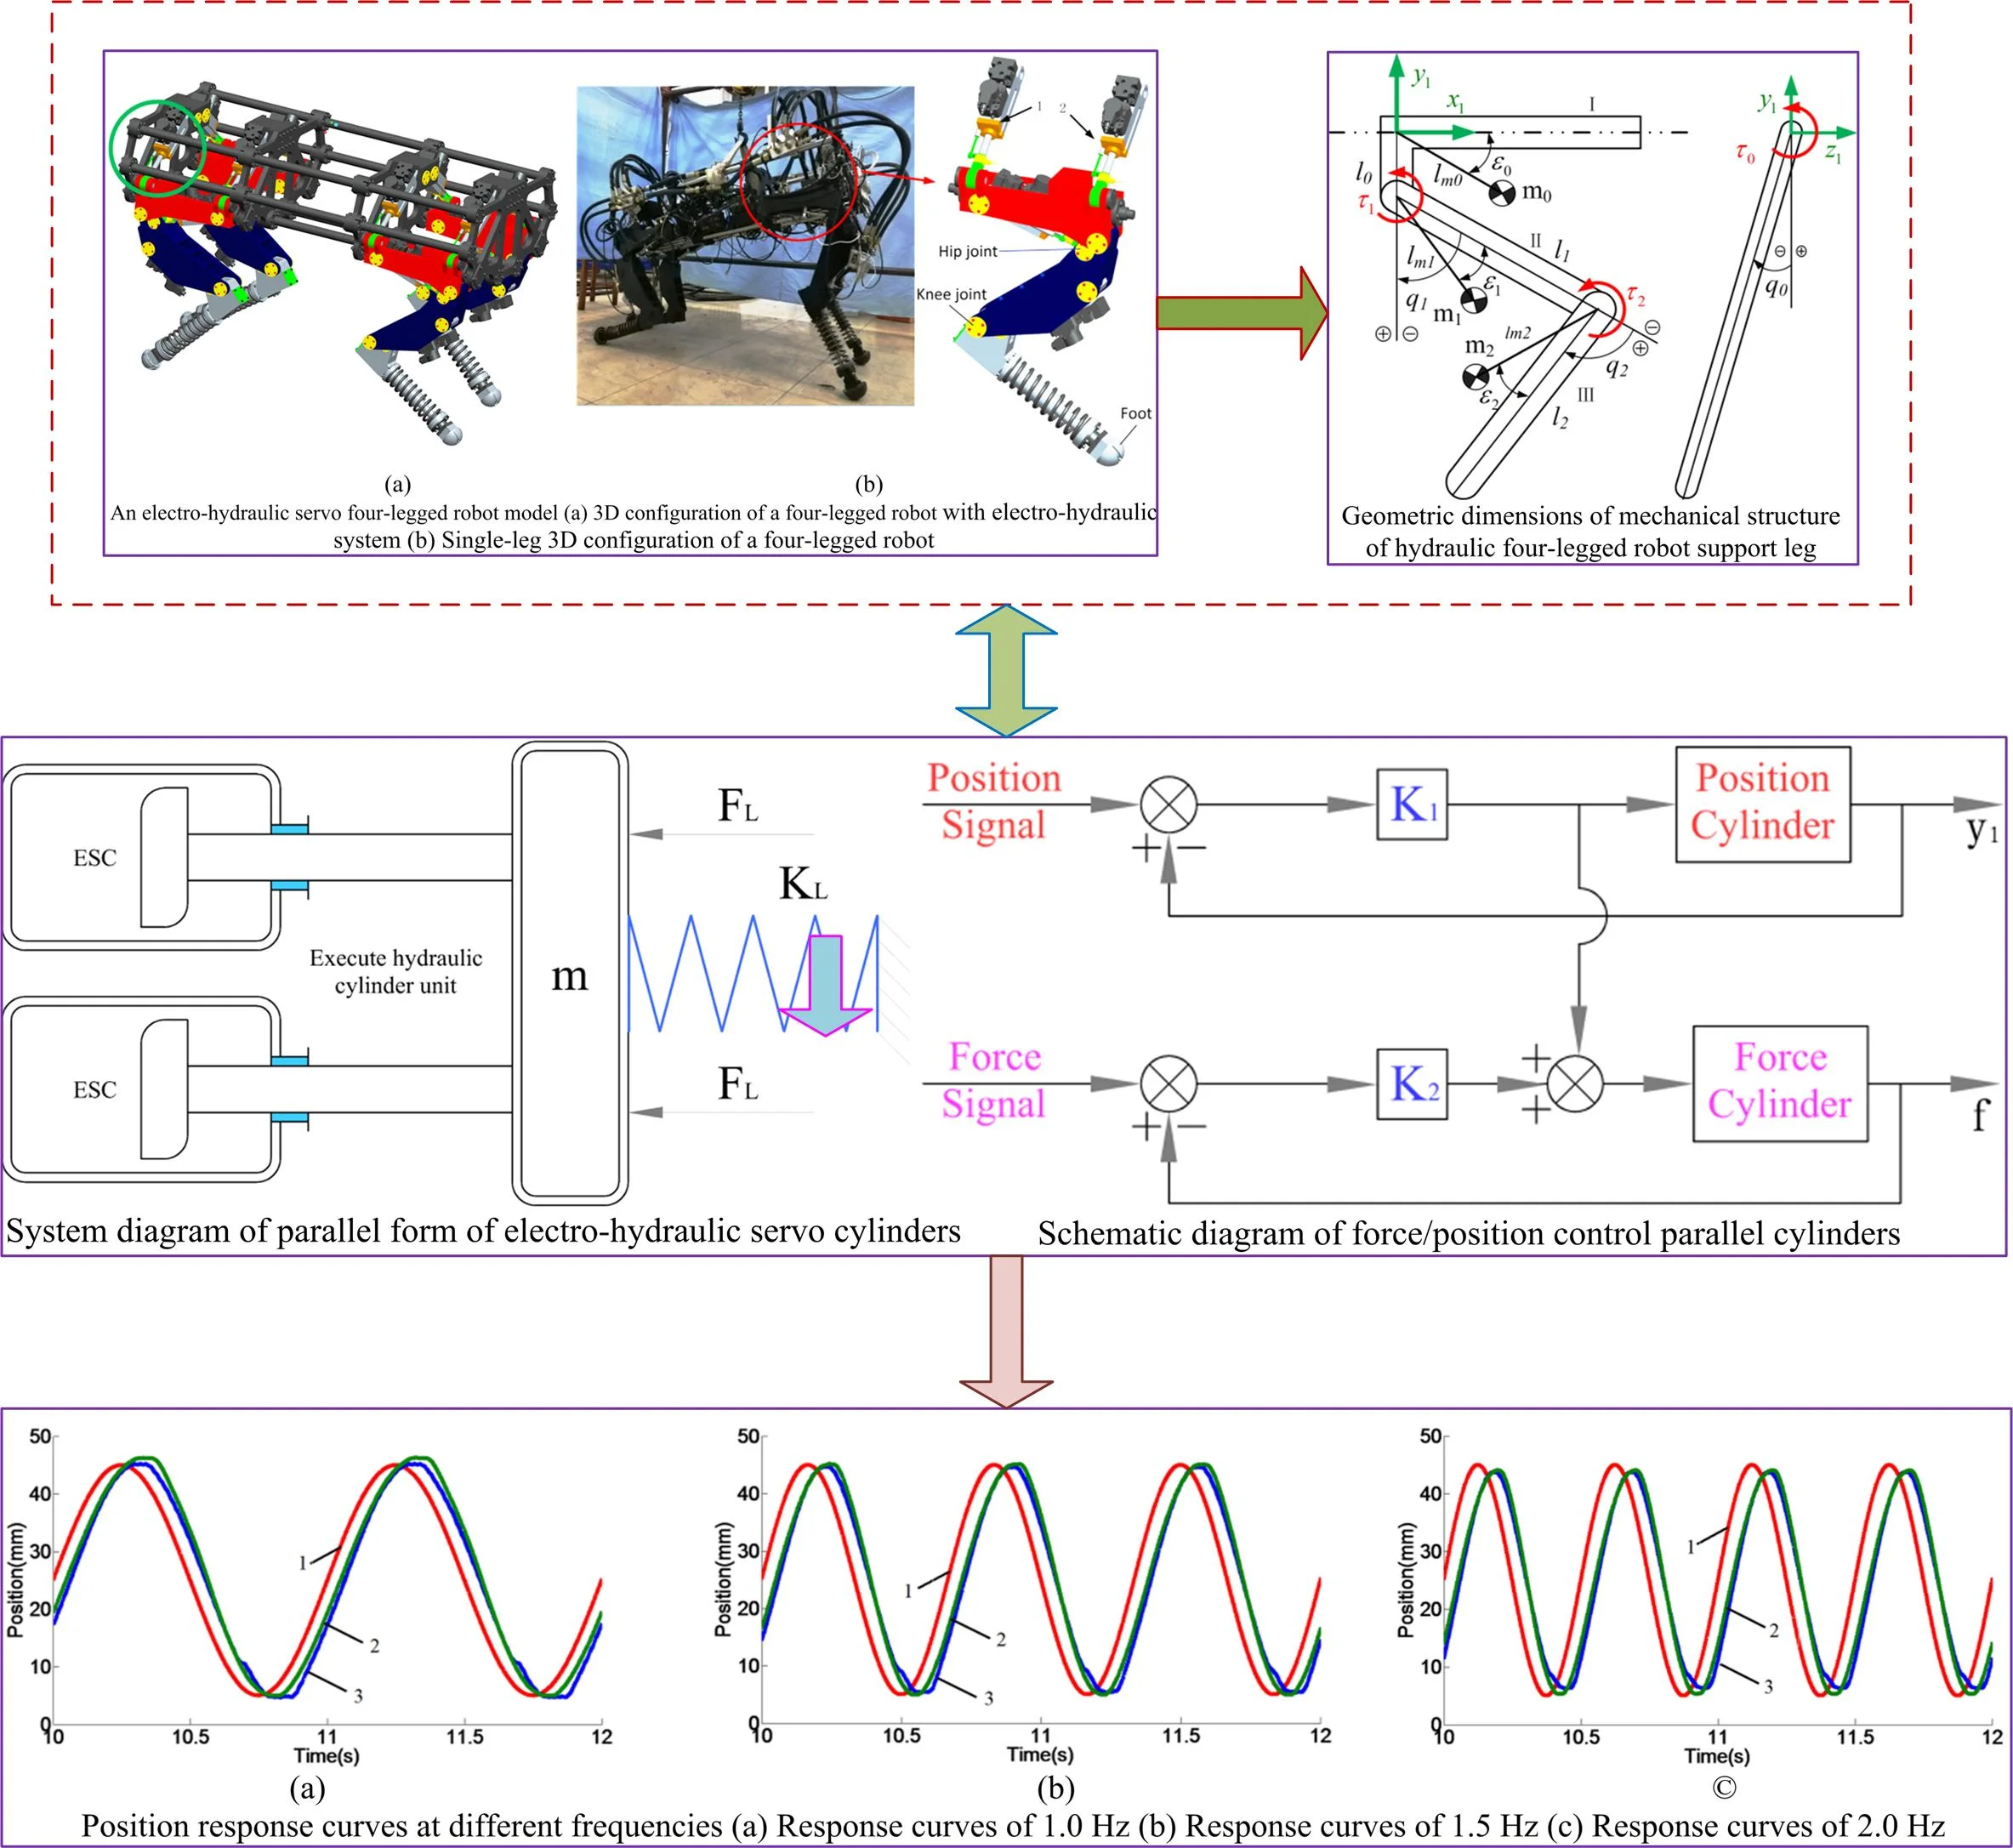 Kinematics analysis of a FLHL robot parallel-executed cylinder mechanical integration system with force/position hybrid control servo actuator